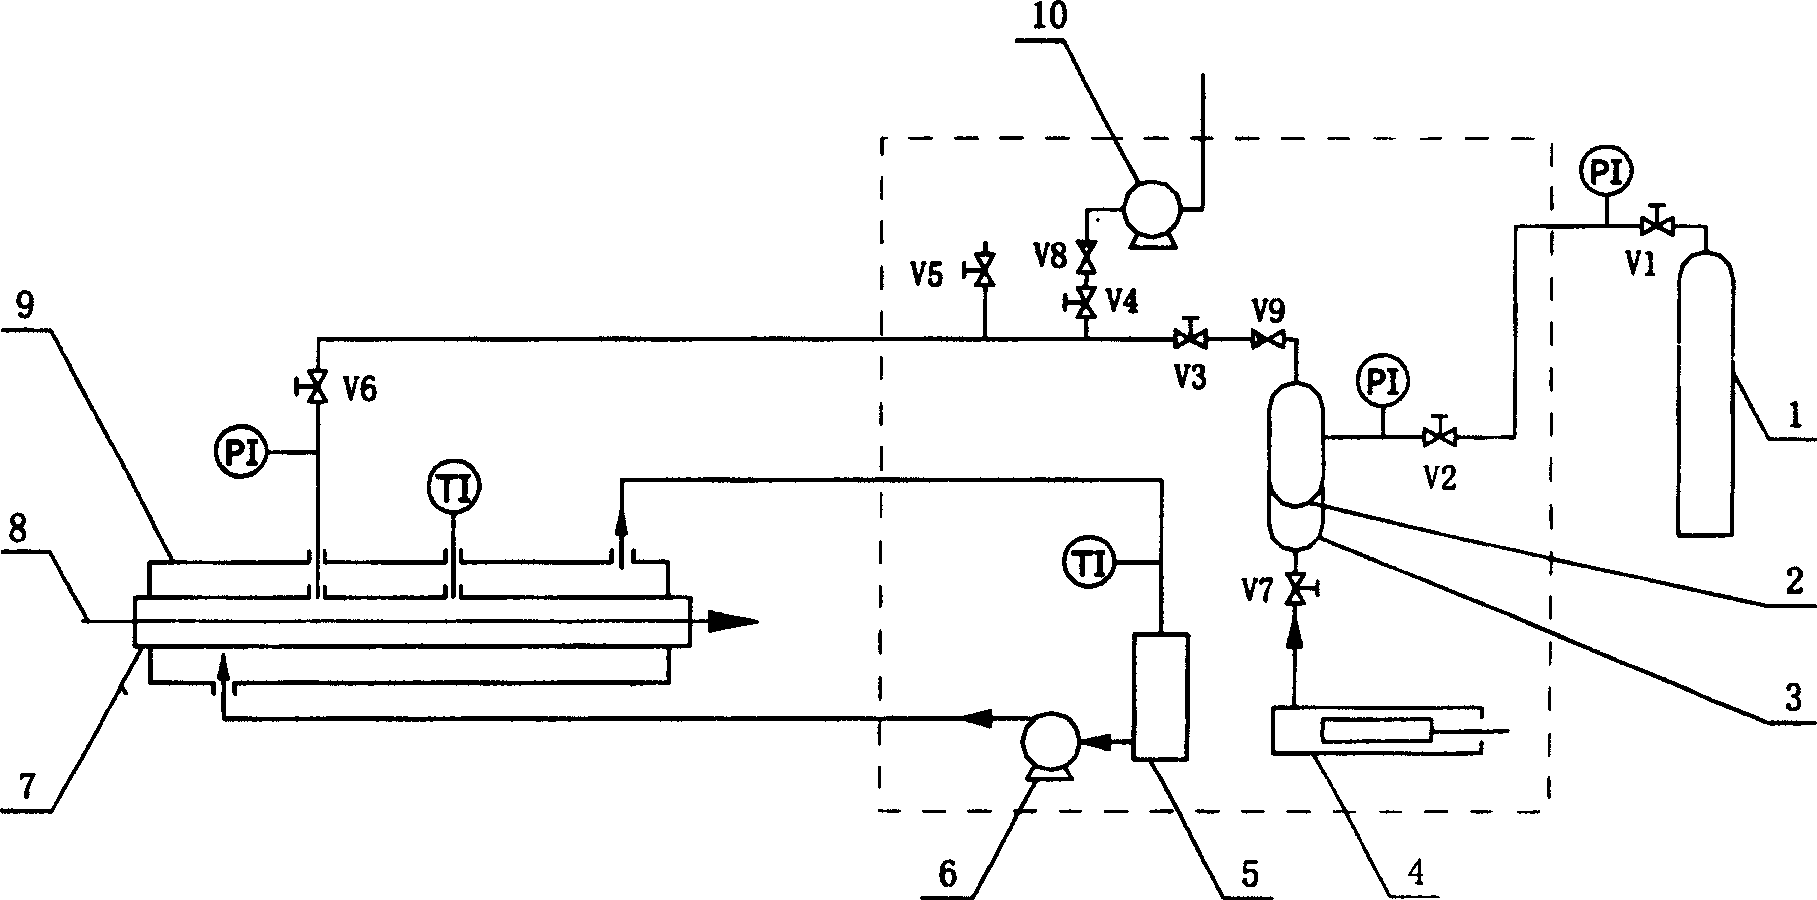 Approximate outer fluid generator for pulsed laser Q modulation